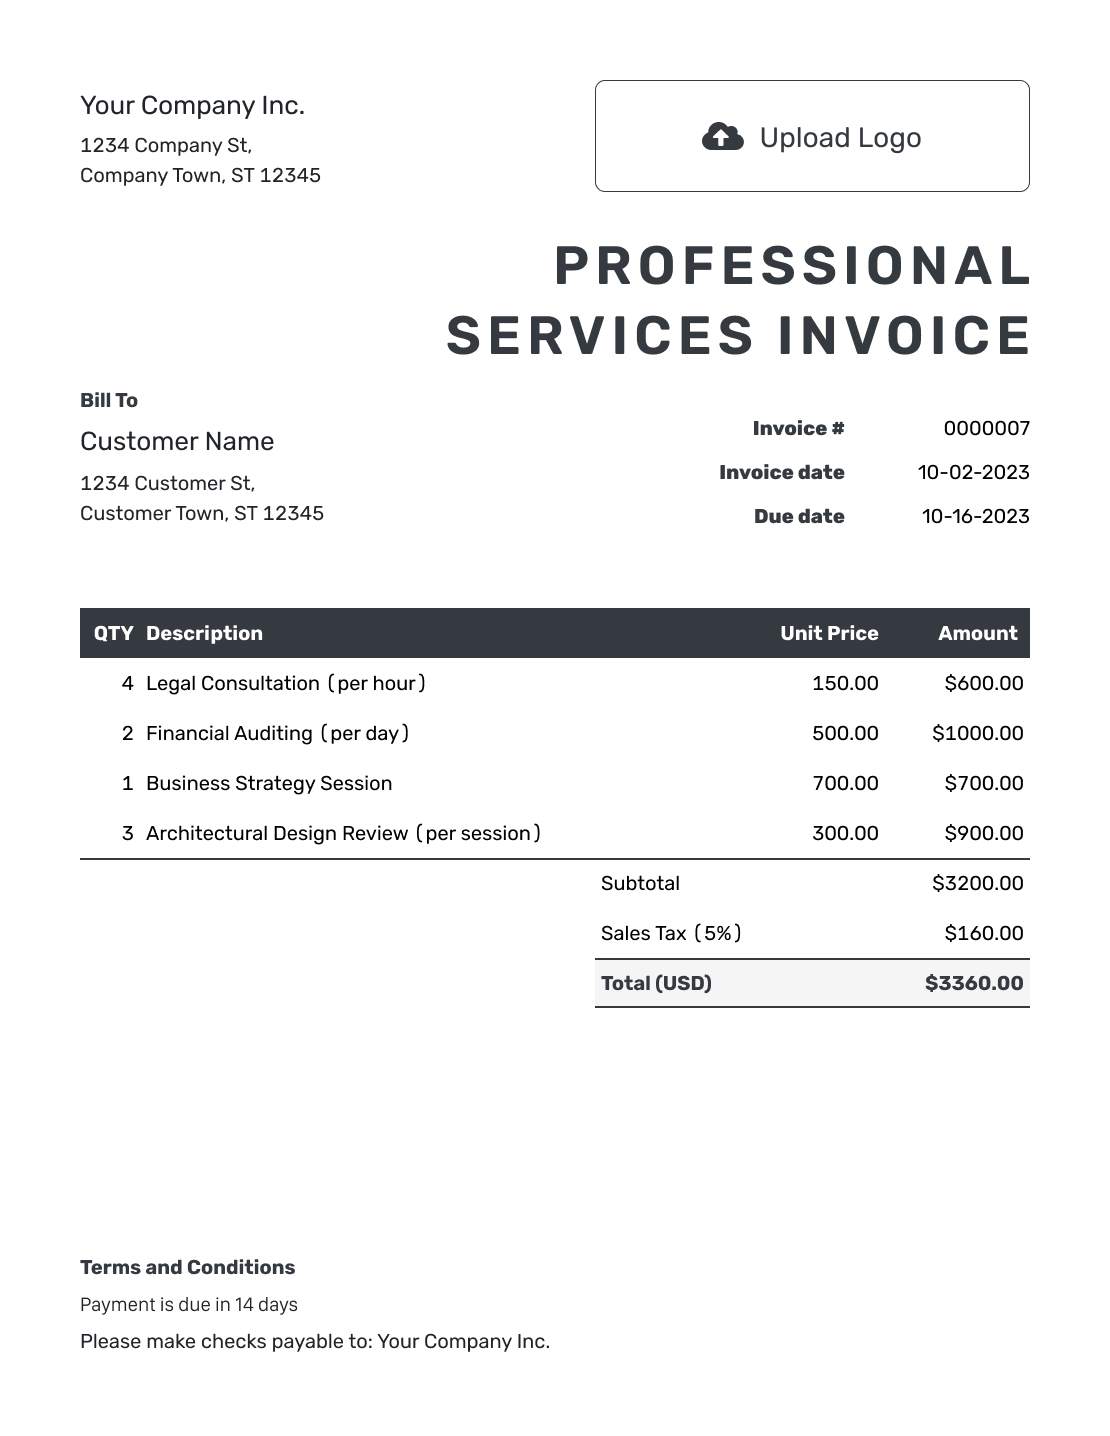 Hourly Professional Services Invoice Template